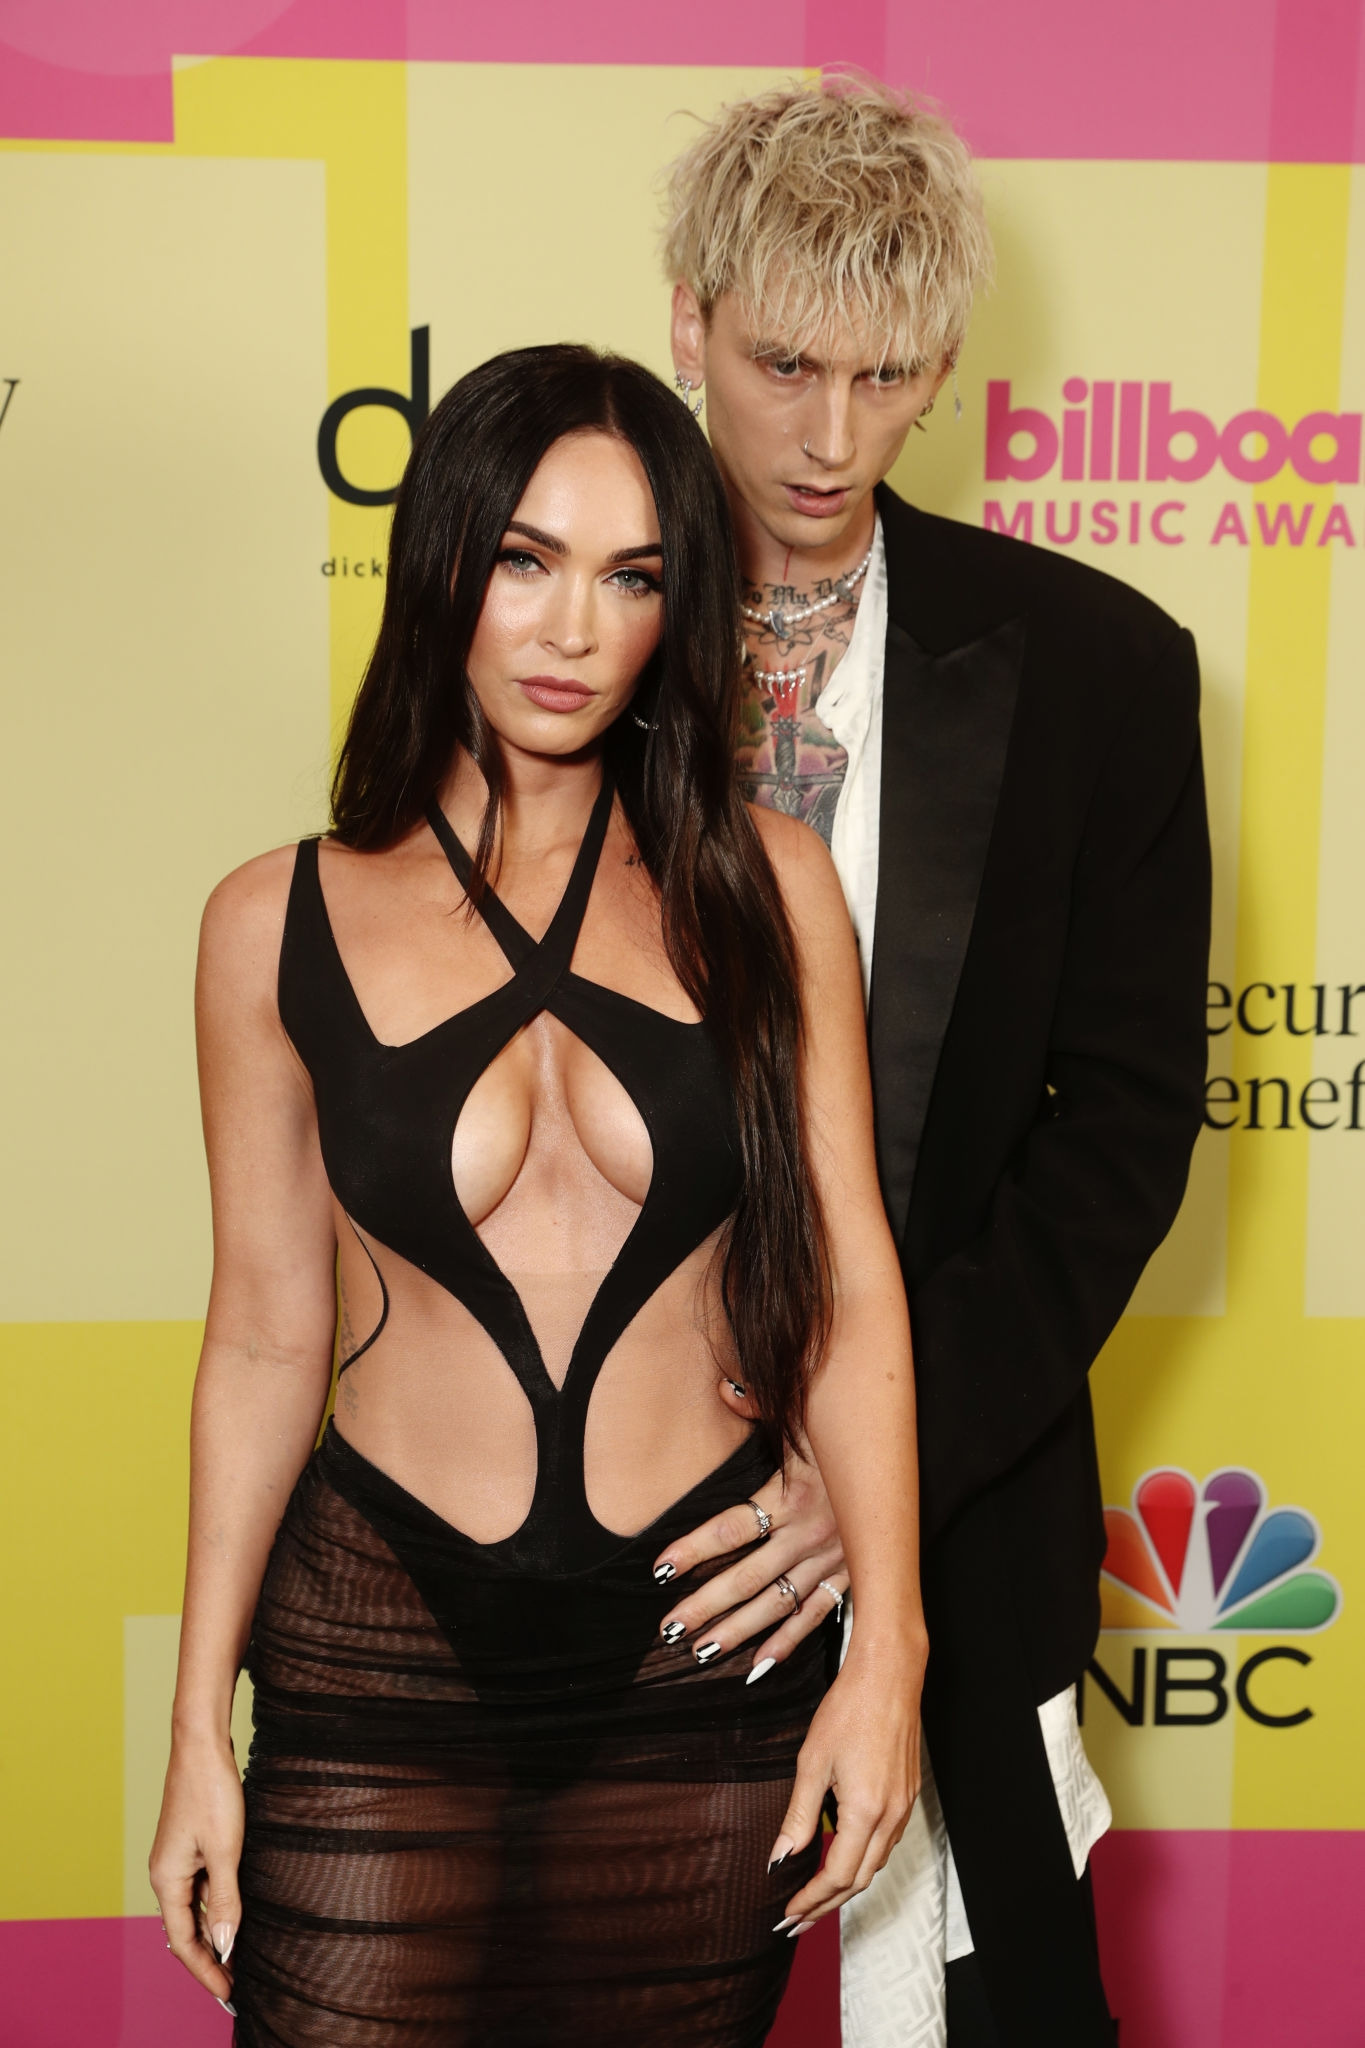 Megan Fox - Pictured at the 2021 Billboard Music Awards in Los Angeles